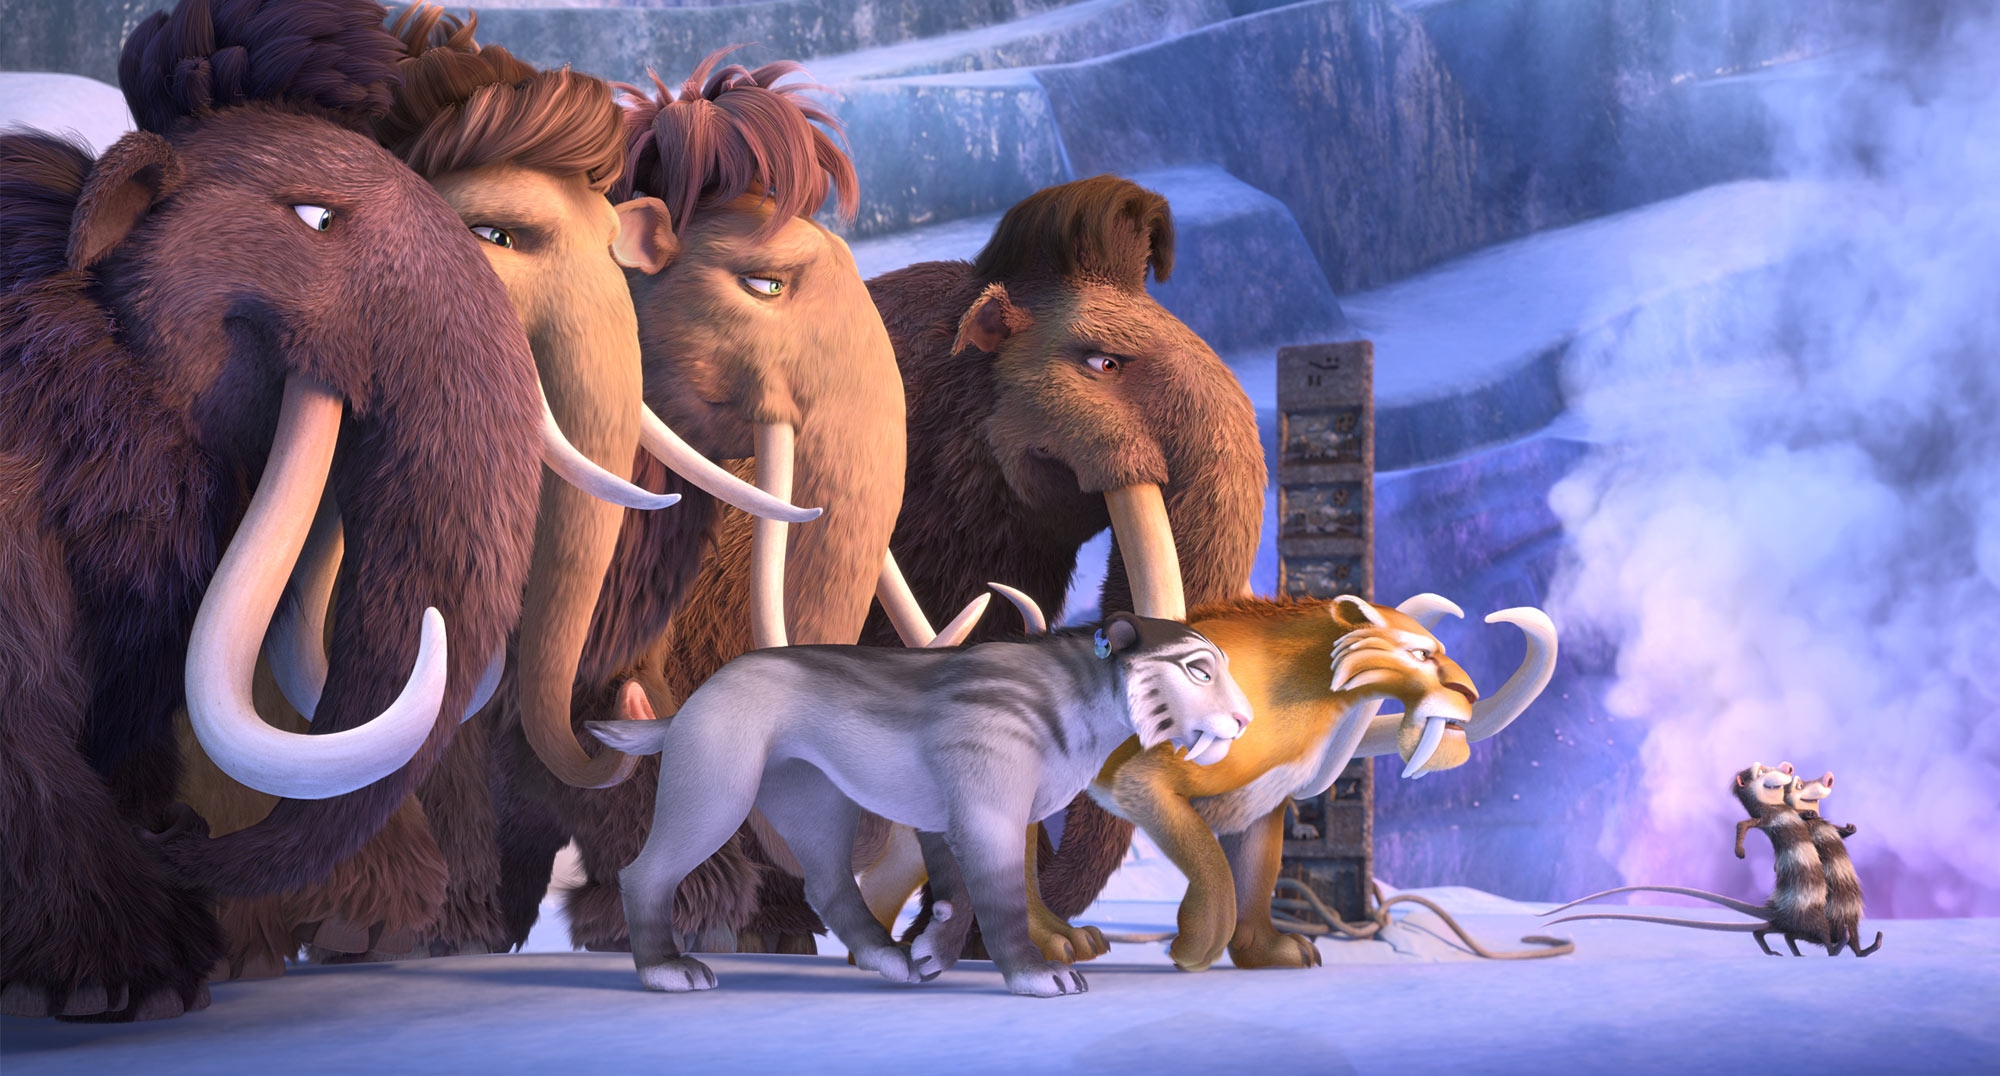 Ice Age Wallpapers